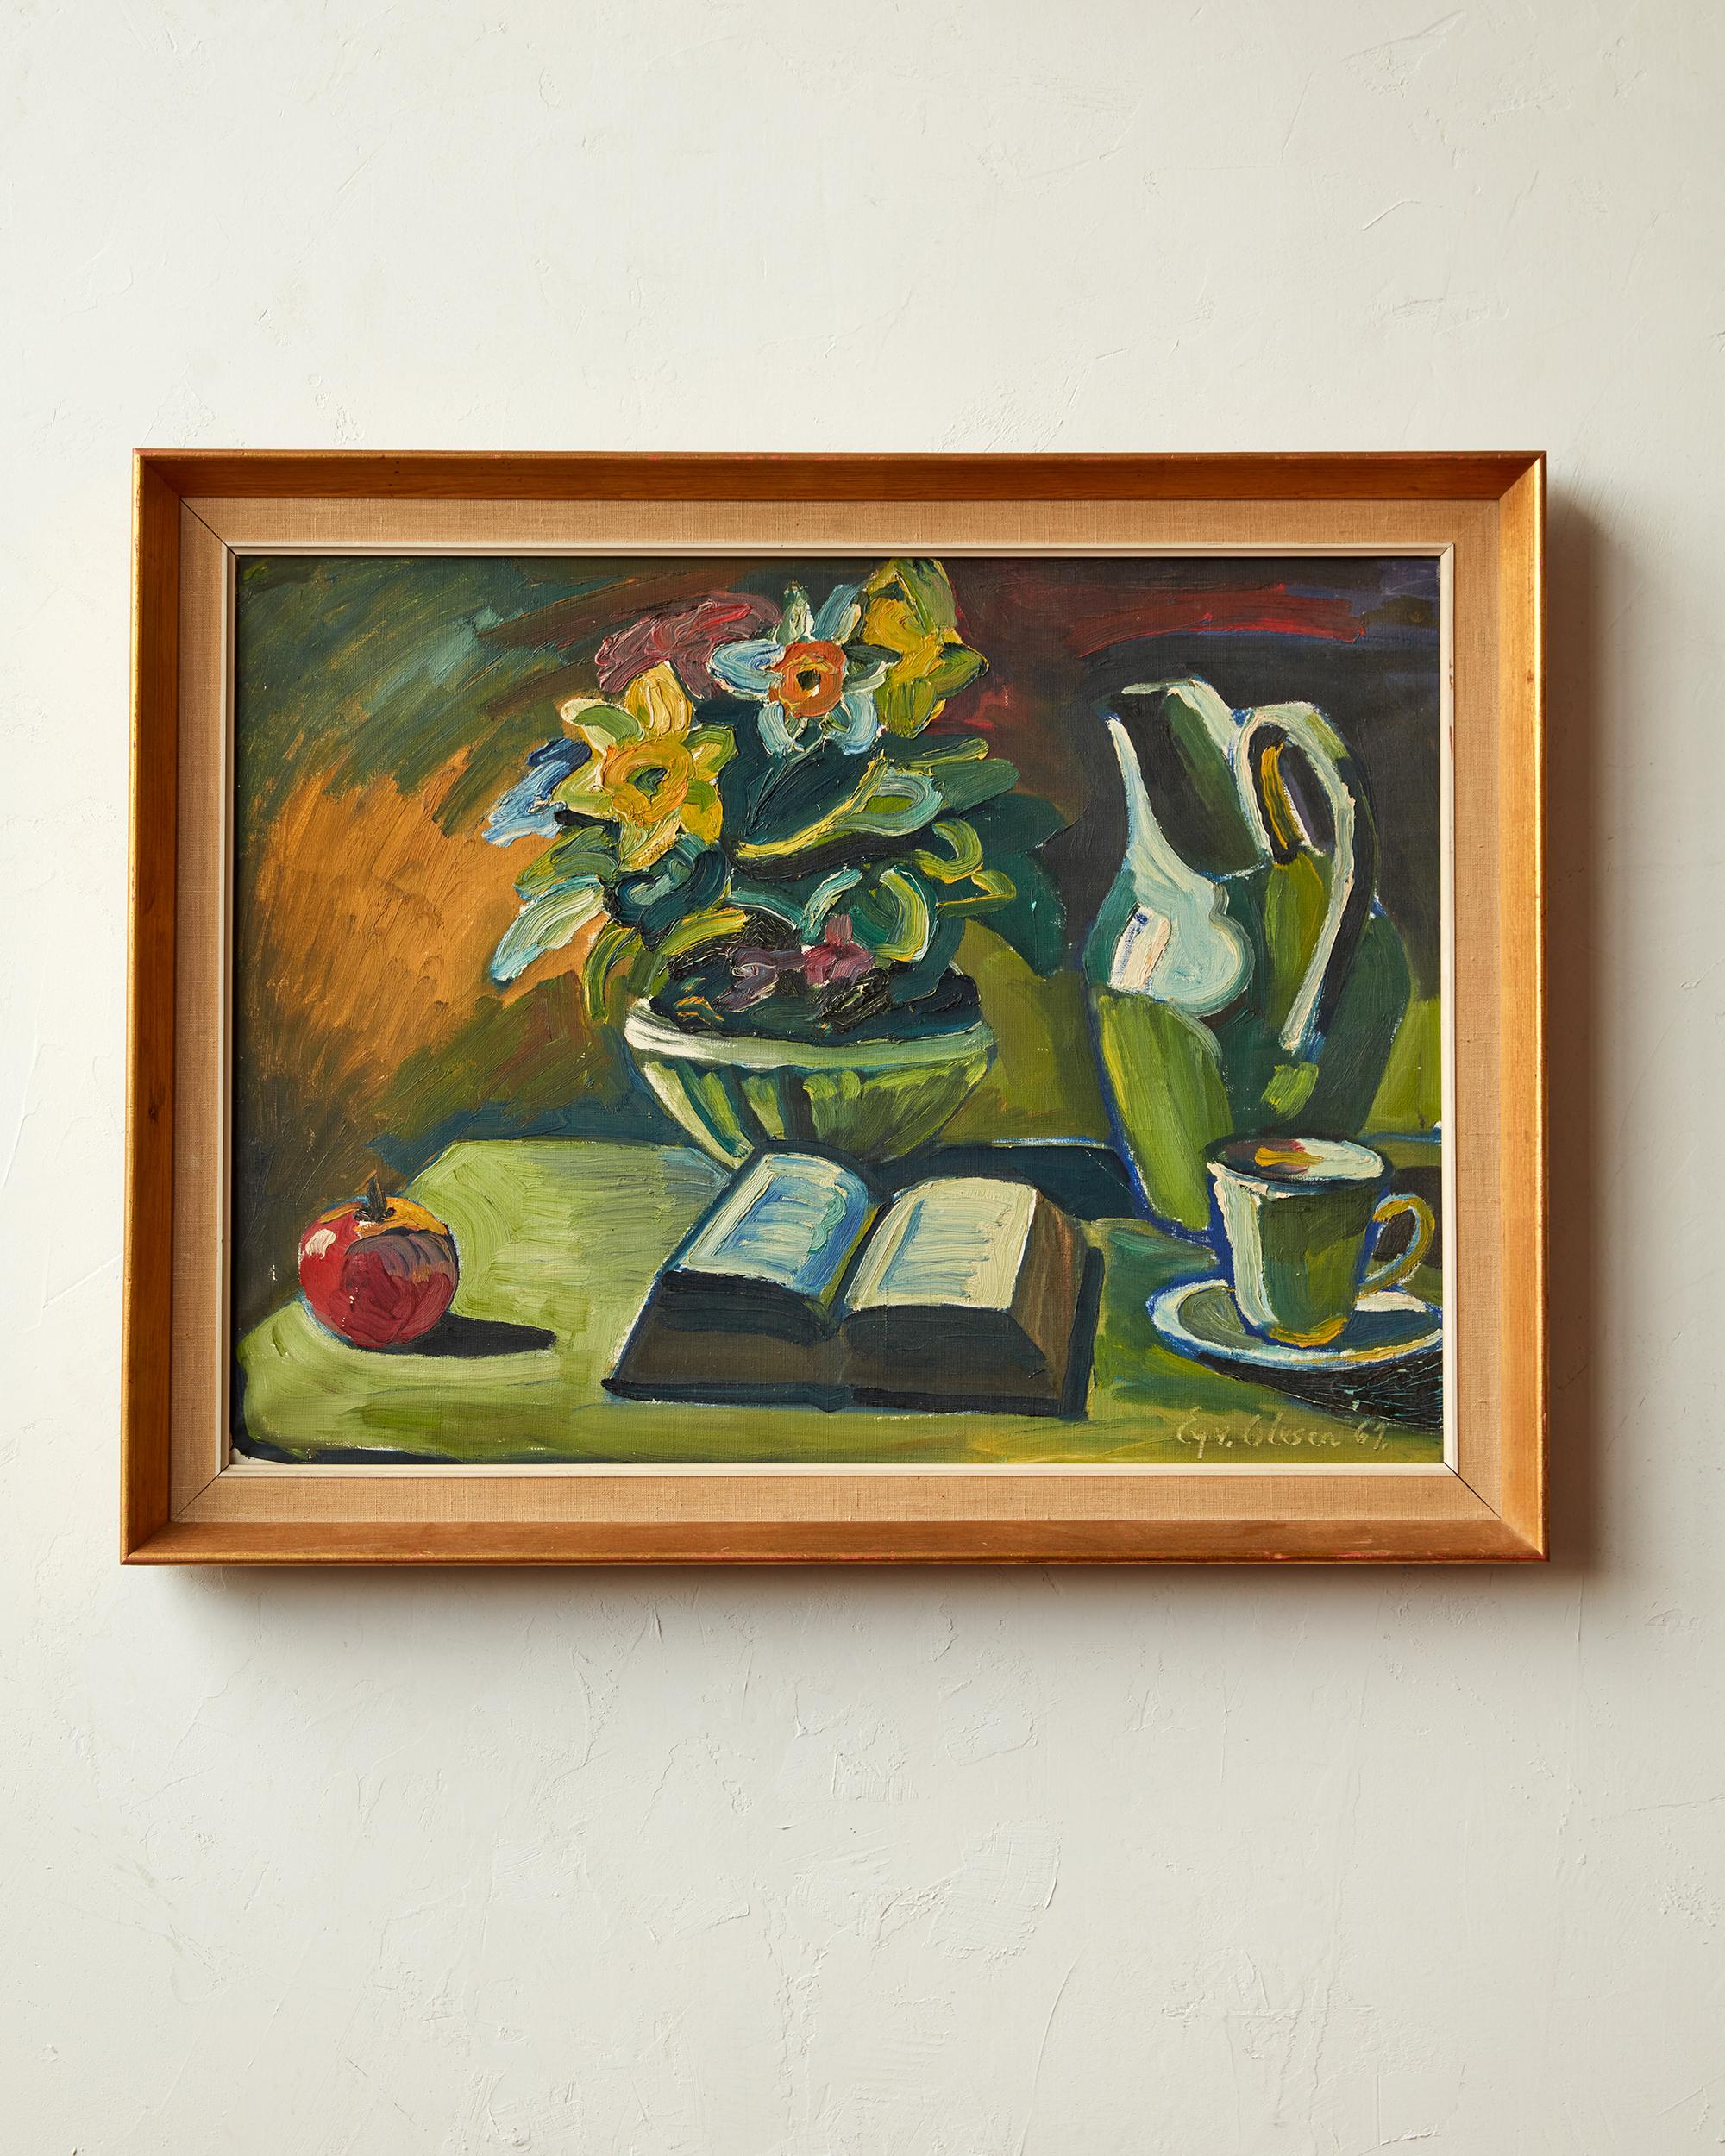 Flowers, Fruit and Book Still life by Eyvind Oleson 1967 Still Life Painting 1